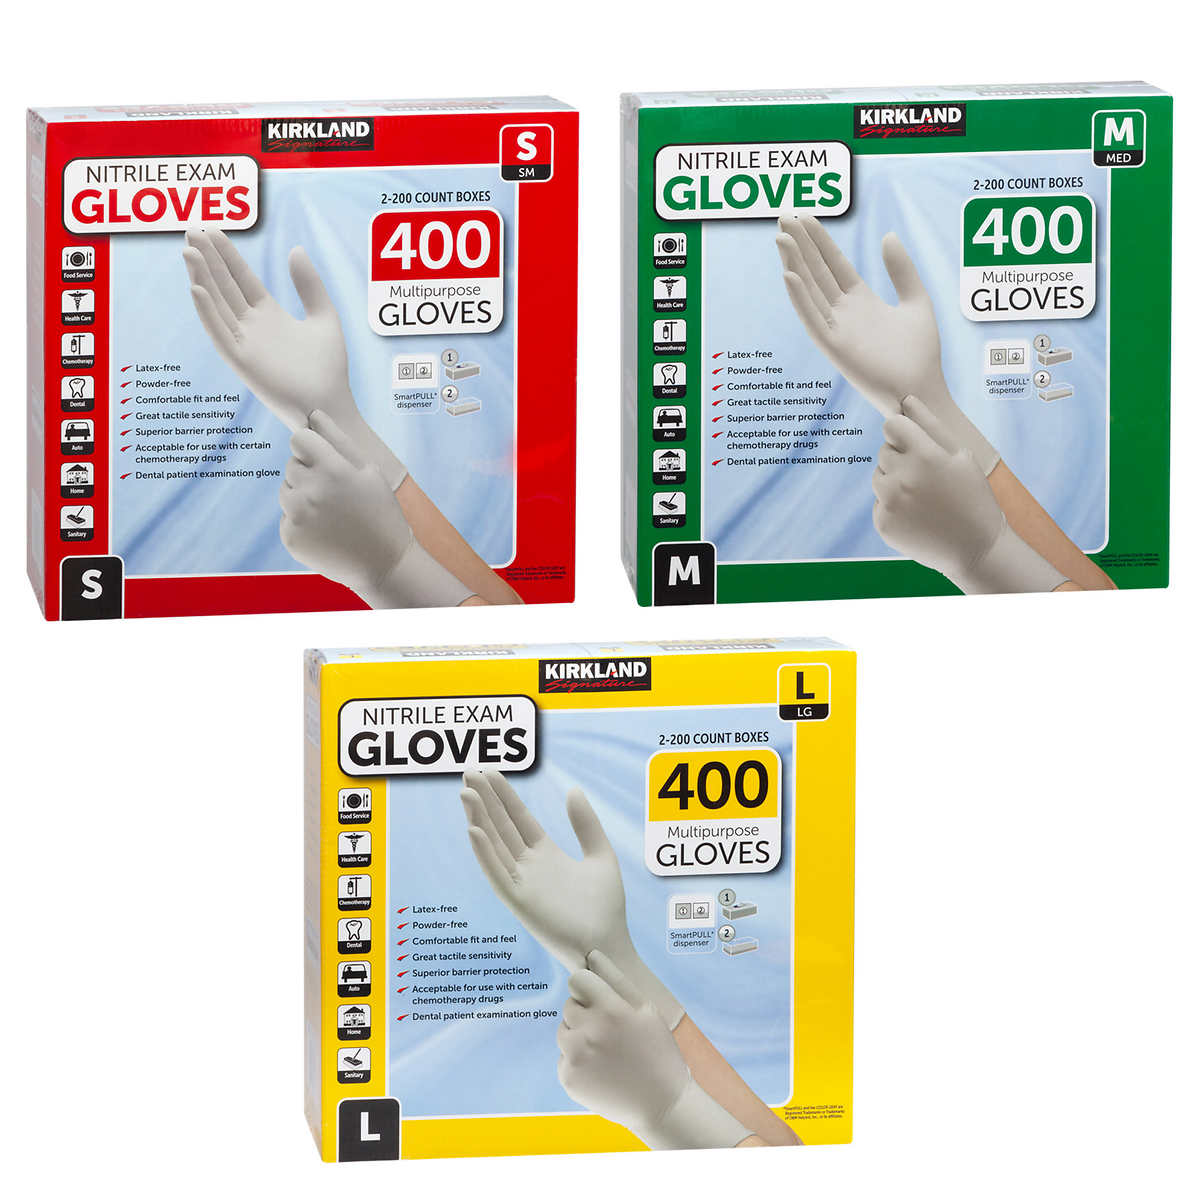 Dishwashing Non-sterile Hair Coloring Small Multi-purpose Transparent color Gloves Latex and Powder Free Ambidextrous Use for Cleaning Disposable PVC Gloves